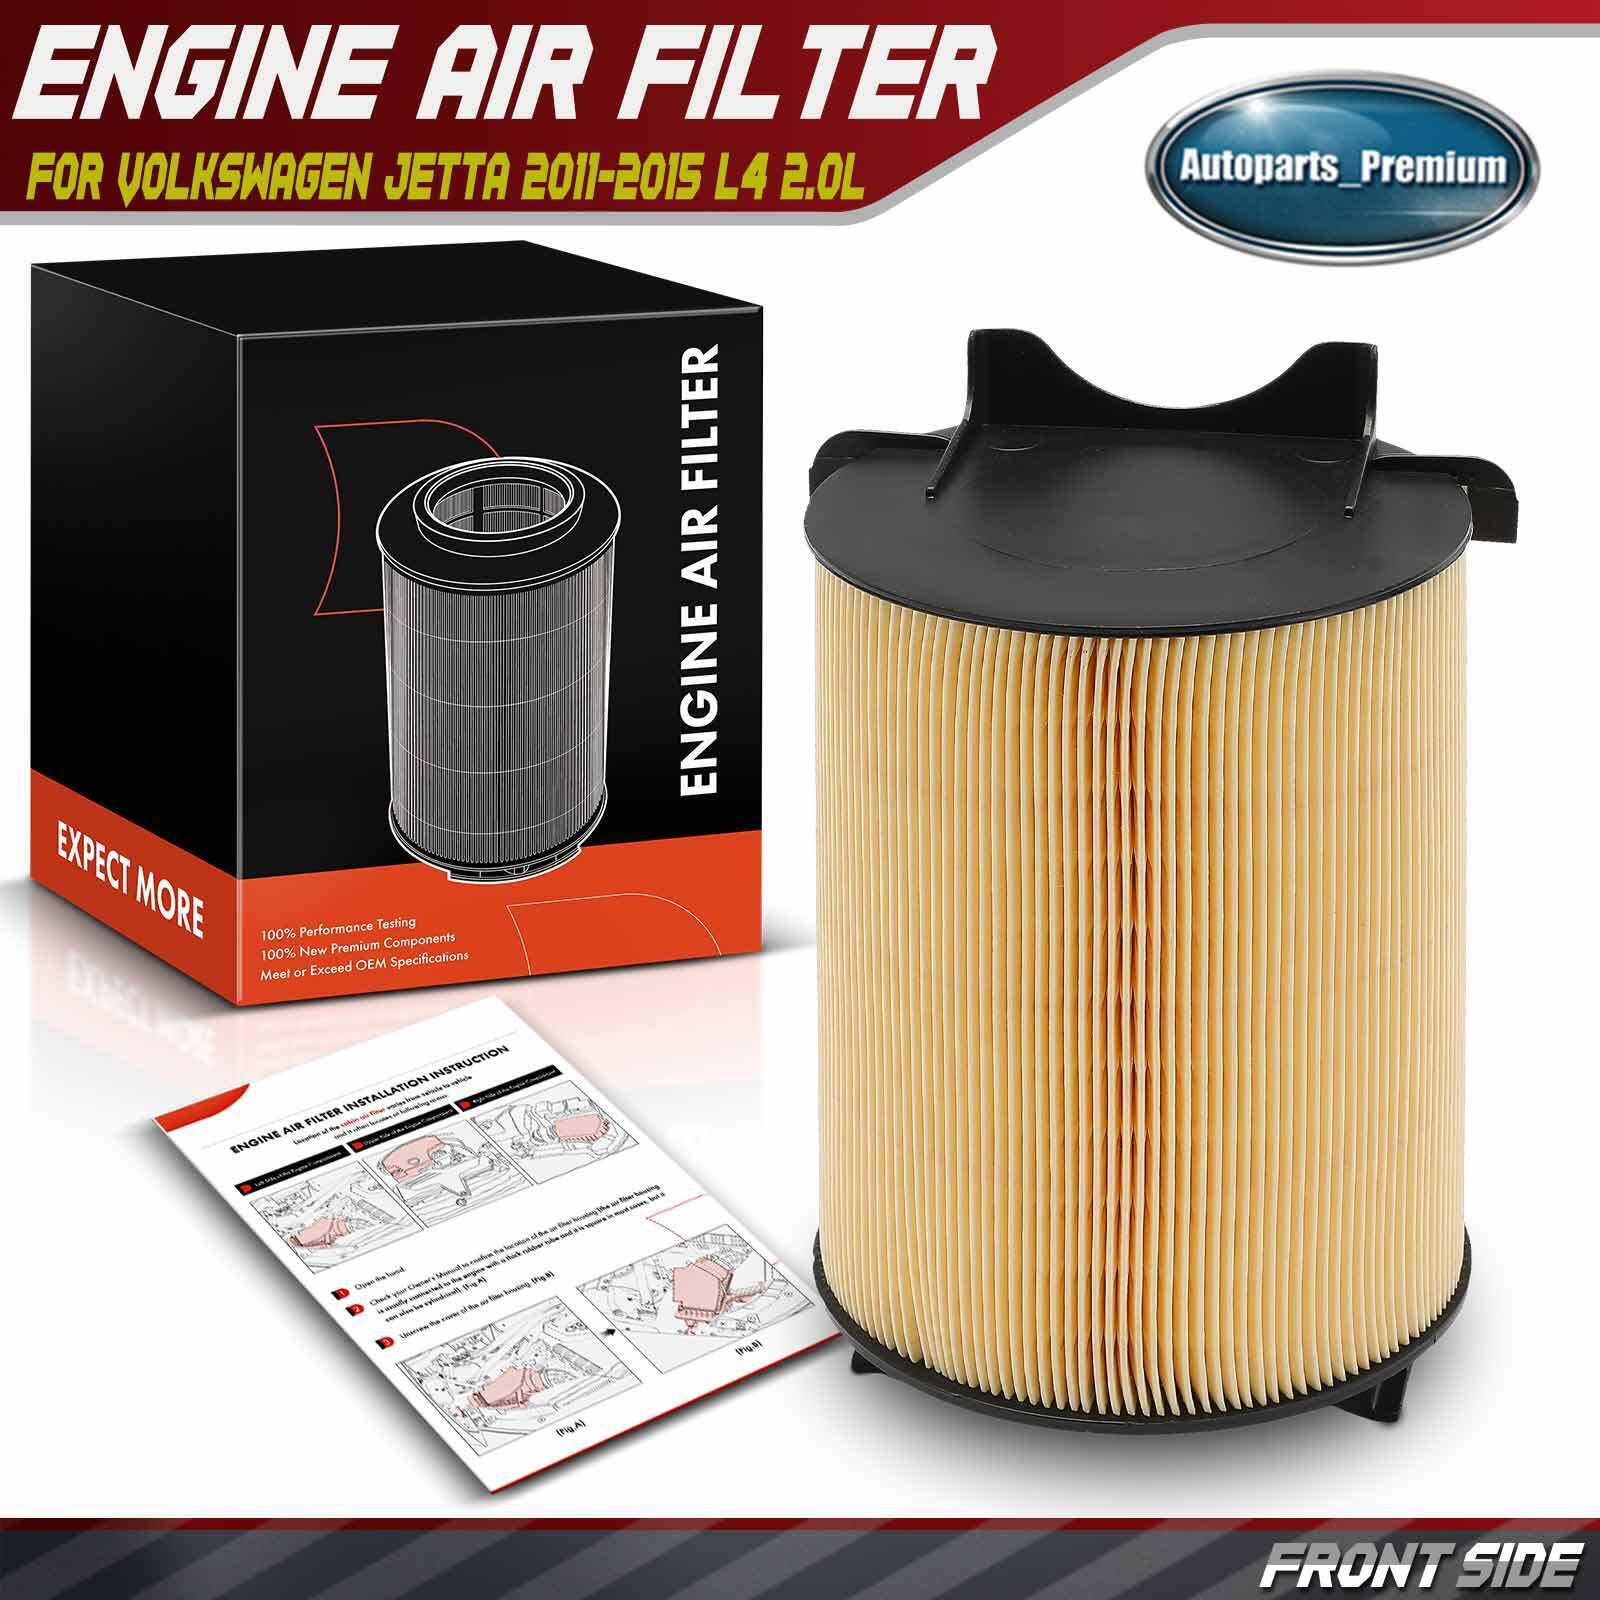 New Engine Air Filter for Volkswagen Jetta 2011 2012 2013 2014-2015 L4 2.0L GAS